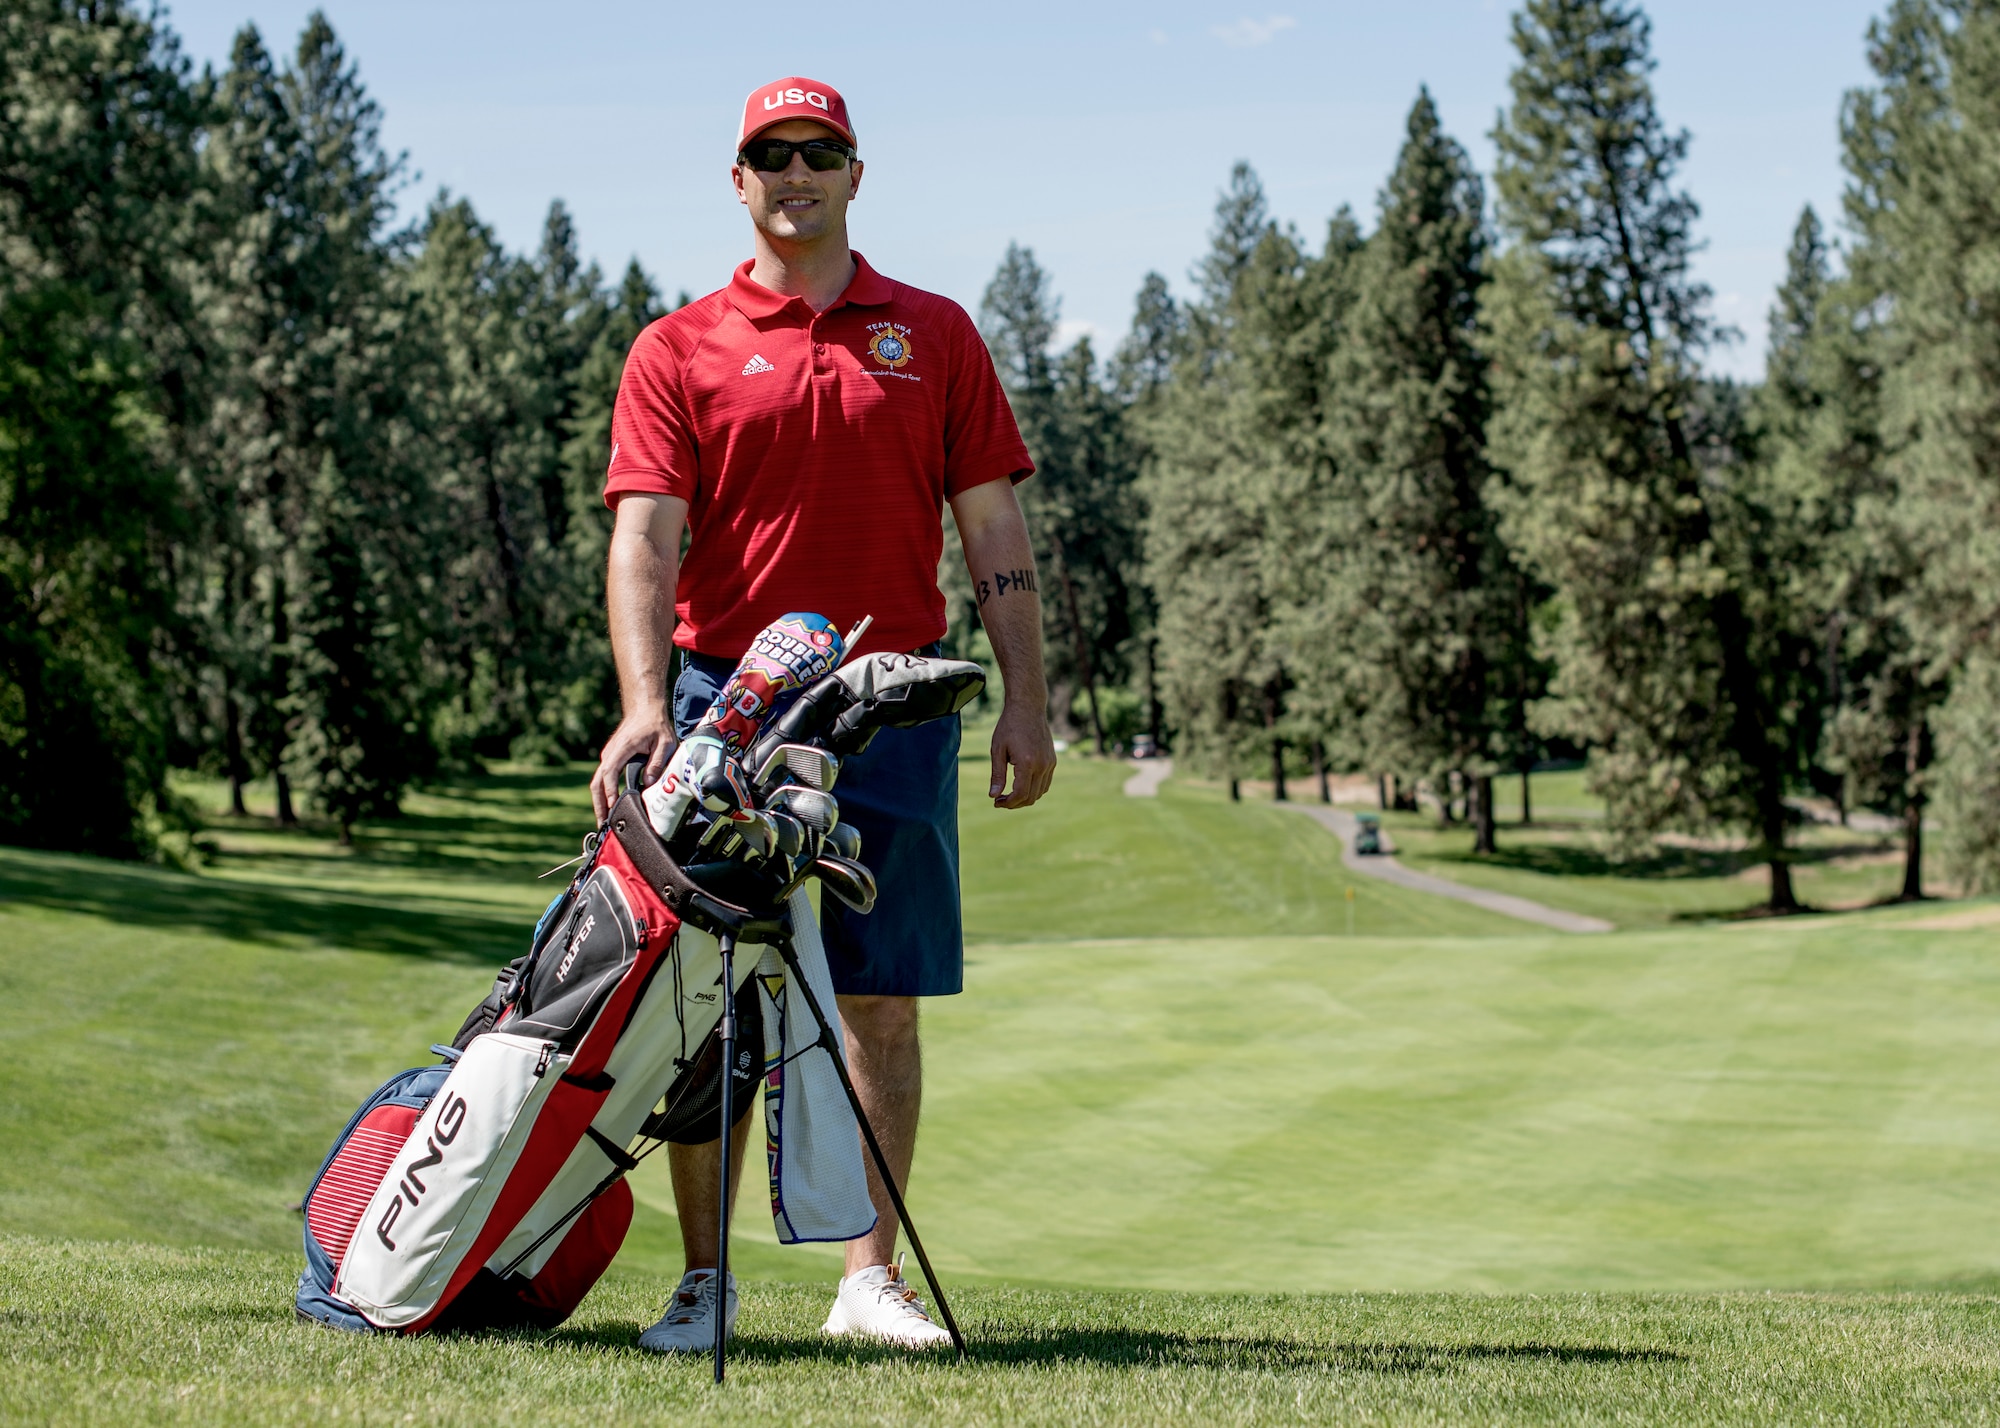 U.S. Air Force Staff Sgt. Dolton Dishman, 92nd Operations Support Squadron flotation equipment NCO in charge, poses for a photo at Indian Canyon Golf Course in Spokane, Washington, May 14, 2019. Dishman recently participated in the 2019 Armed Forces Golf Championship, qualifying for the 7th Conseil International du Sport Militaire Military World Games in China. (U.S. Air Force photo by Airman 1st Class Whitney Laine)